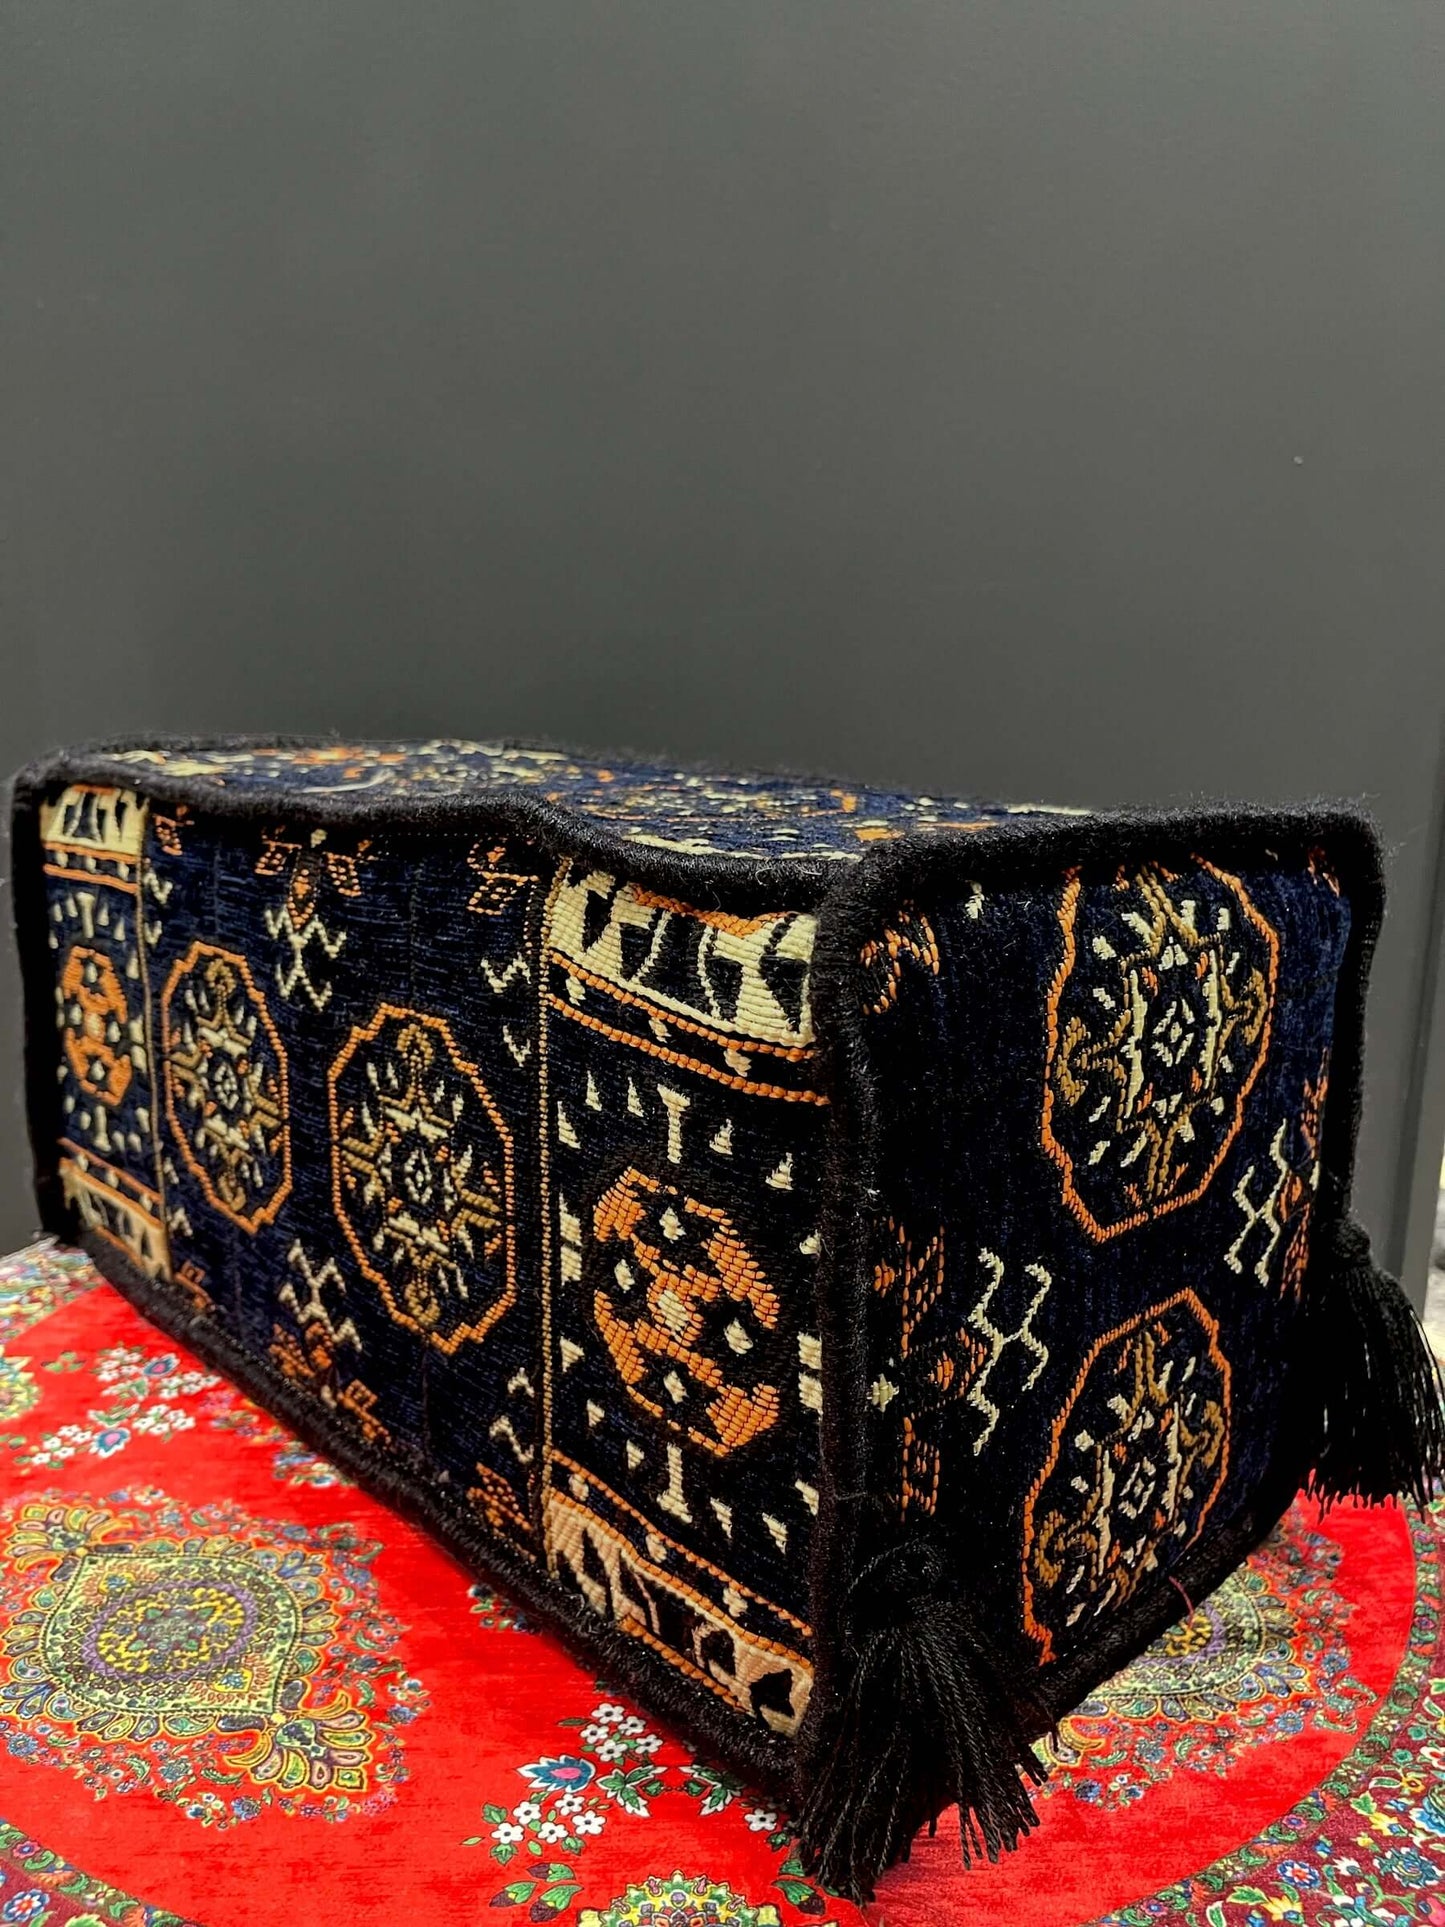 Experience the comfort of traditional Turkish armrests, designed with high-quality covers, supported by a sturdy sponge, and display artisanal craftsmanship. Enjoy a colorful and vibrant design that adds a unique touch to any room. Perfect for long-term s